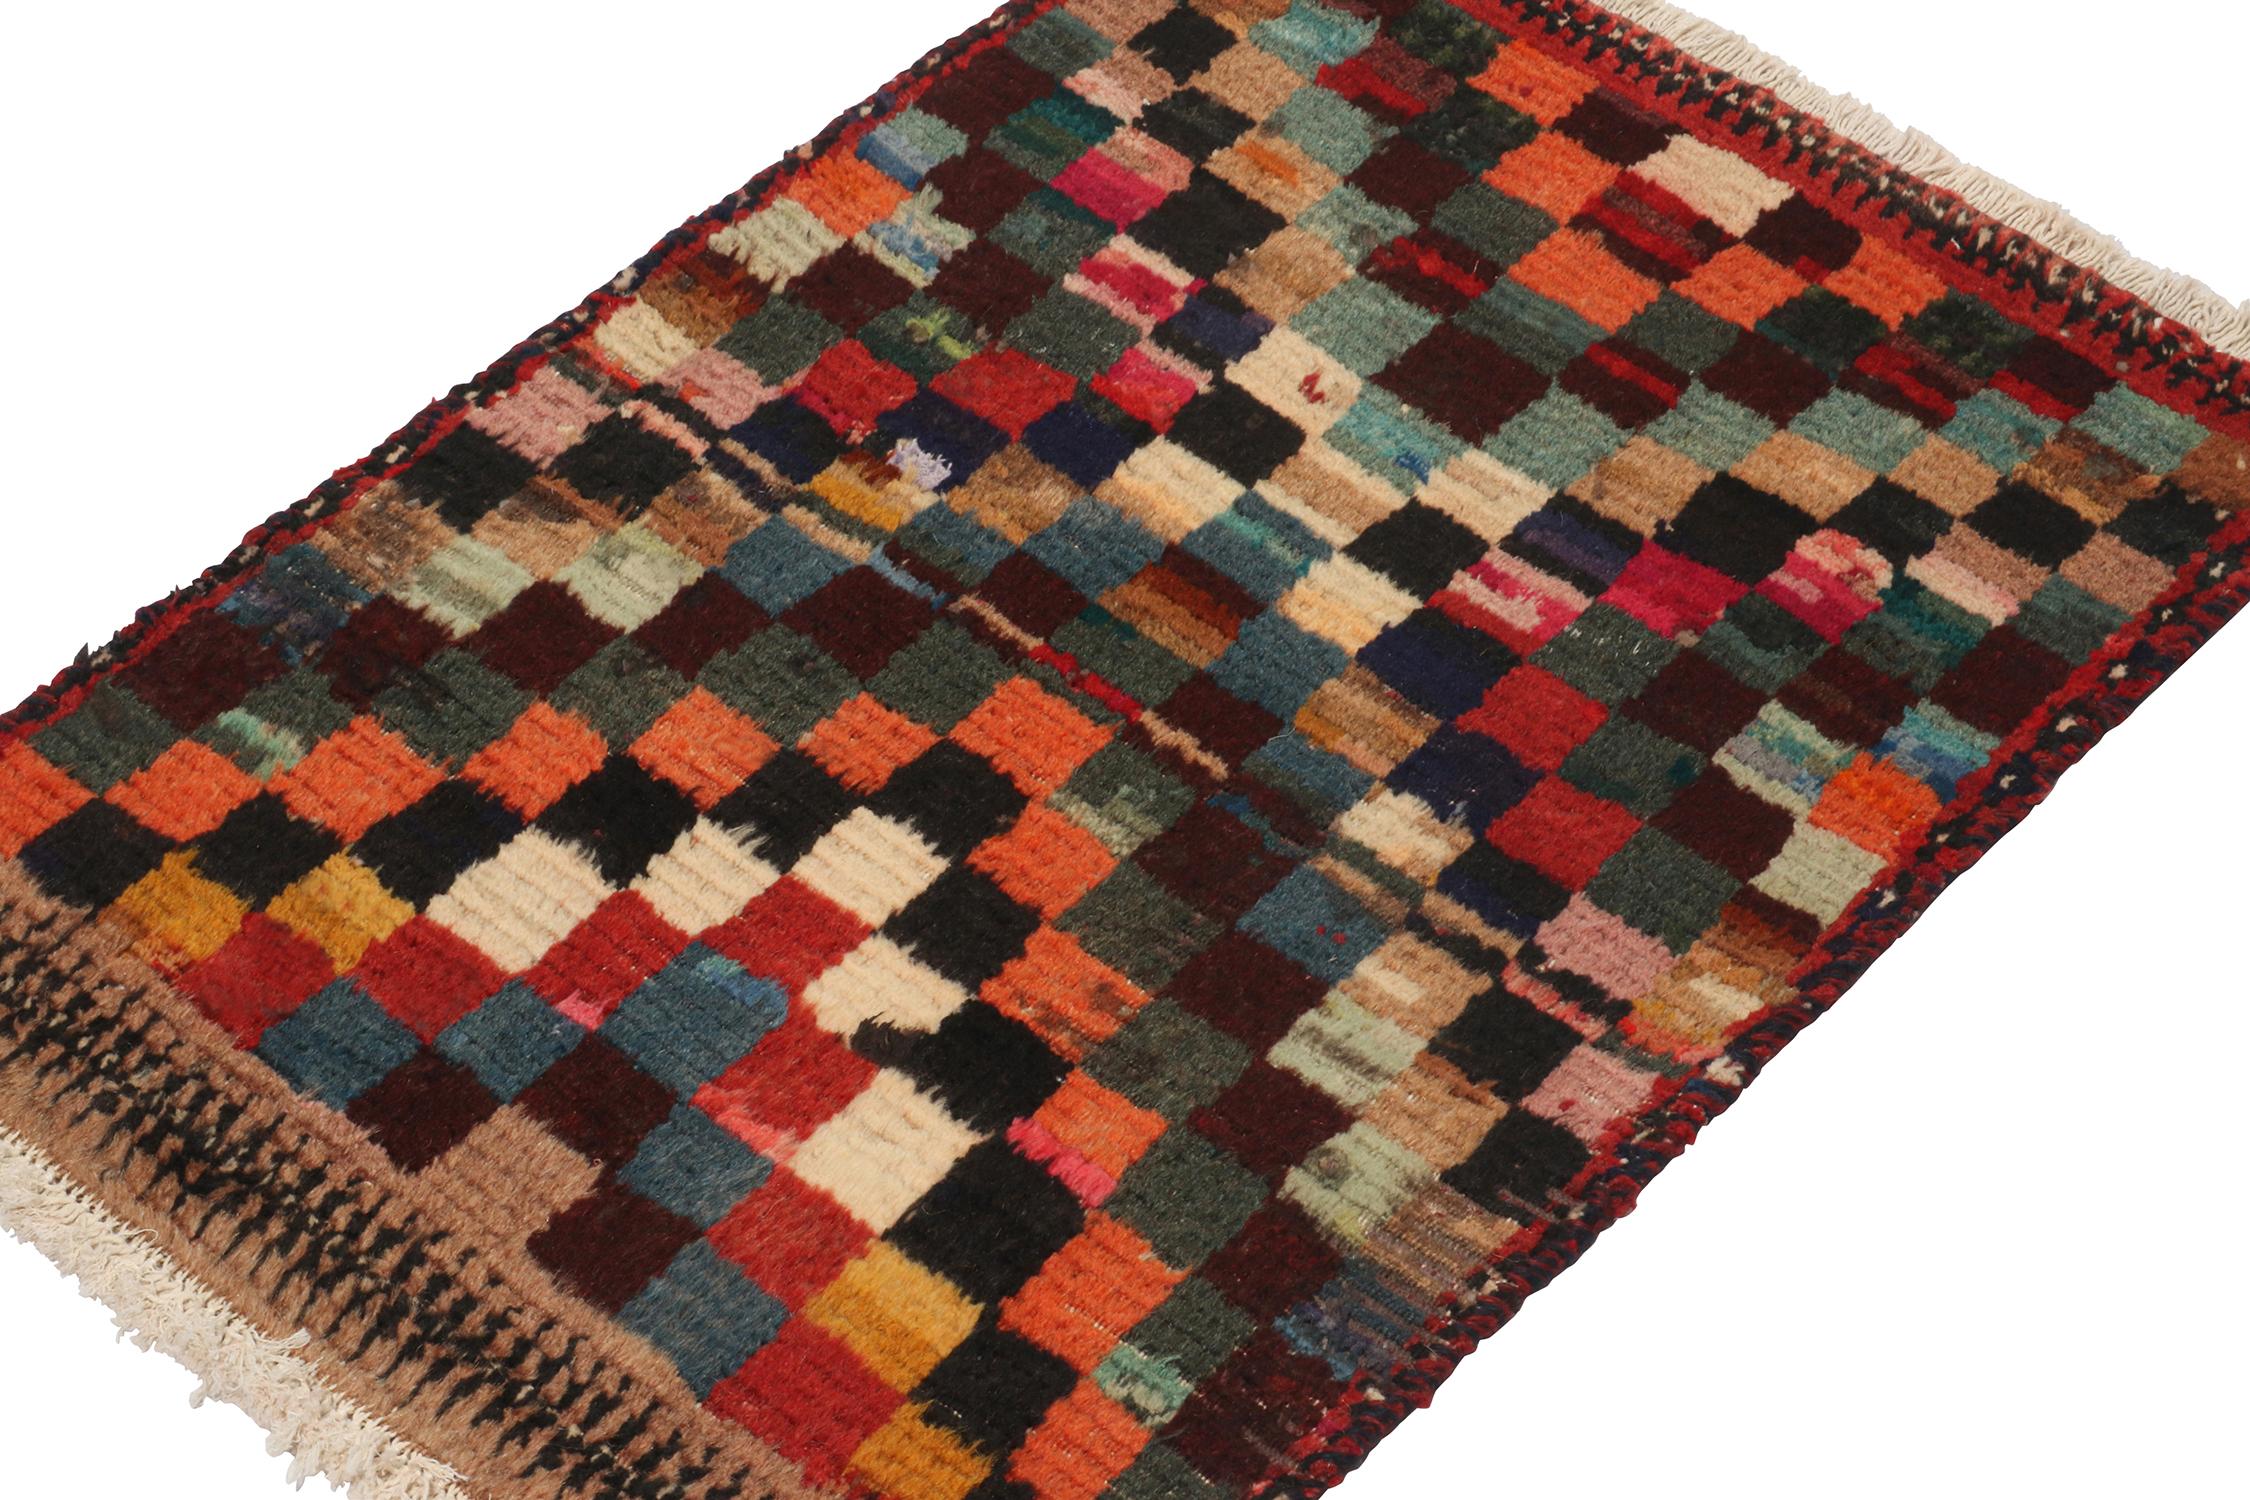 A vintage 2x3 Persian Gabbeh rug, from a grand new entry in Rug & Kilim’s curation of rare tribal pieces. Hand-knotted in wool circa 1950-1960. 

On the Design: 

The piece features a tribal geometric pattern in a whimsical polychromatic